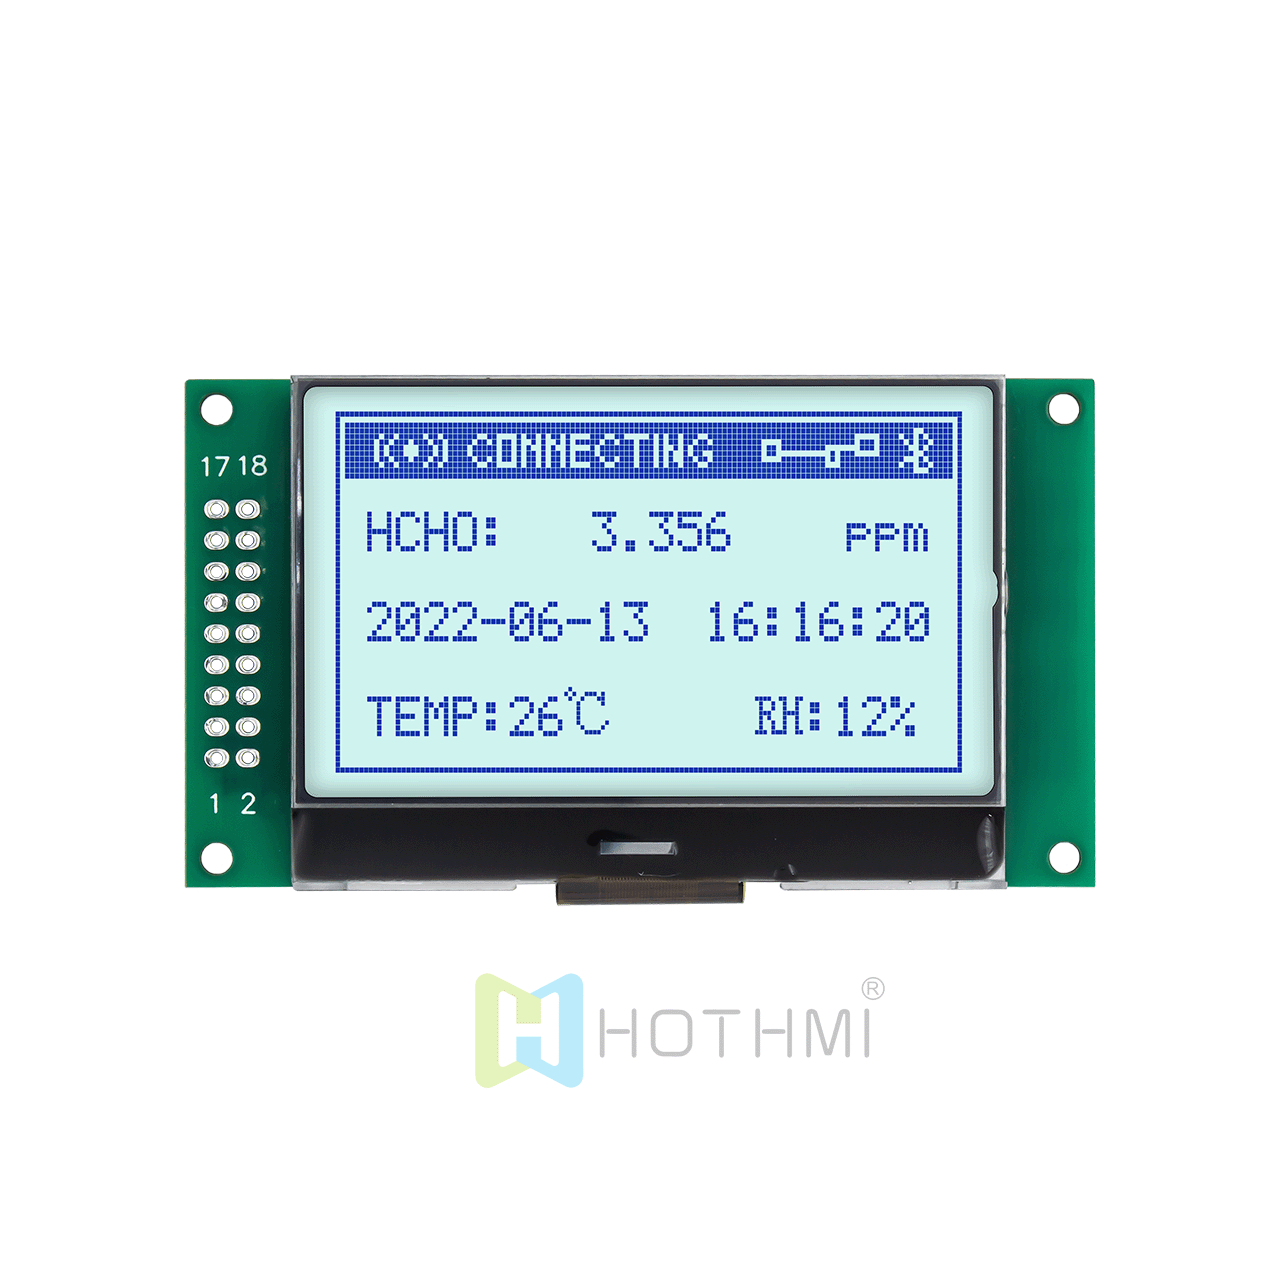 2.4-inch 132x64 LCD graphic LCD screen/13264 graphic dot matrix LCD module/STN positive display/blue text on gray background